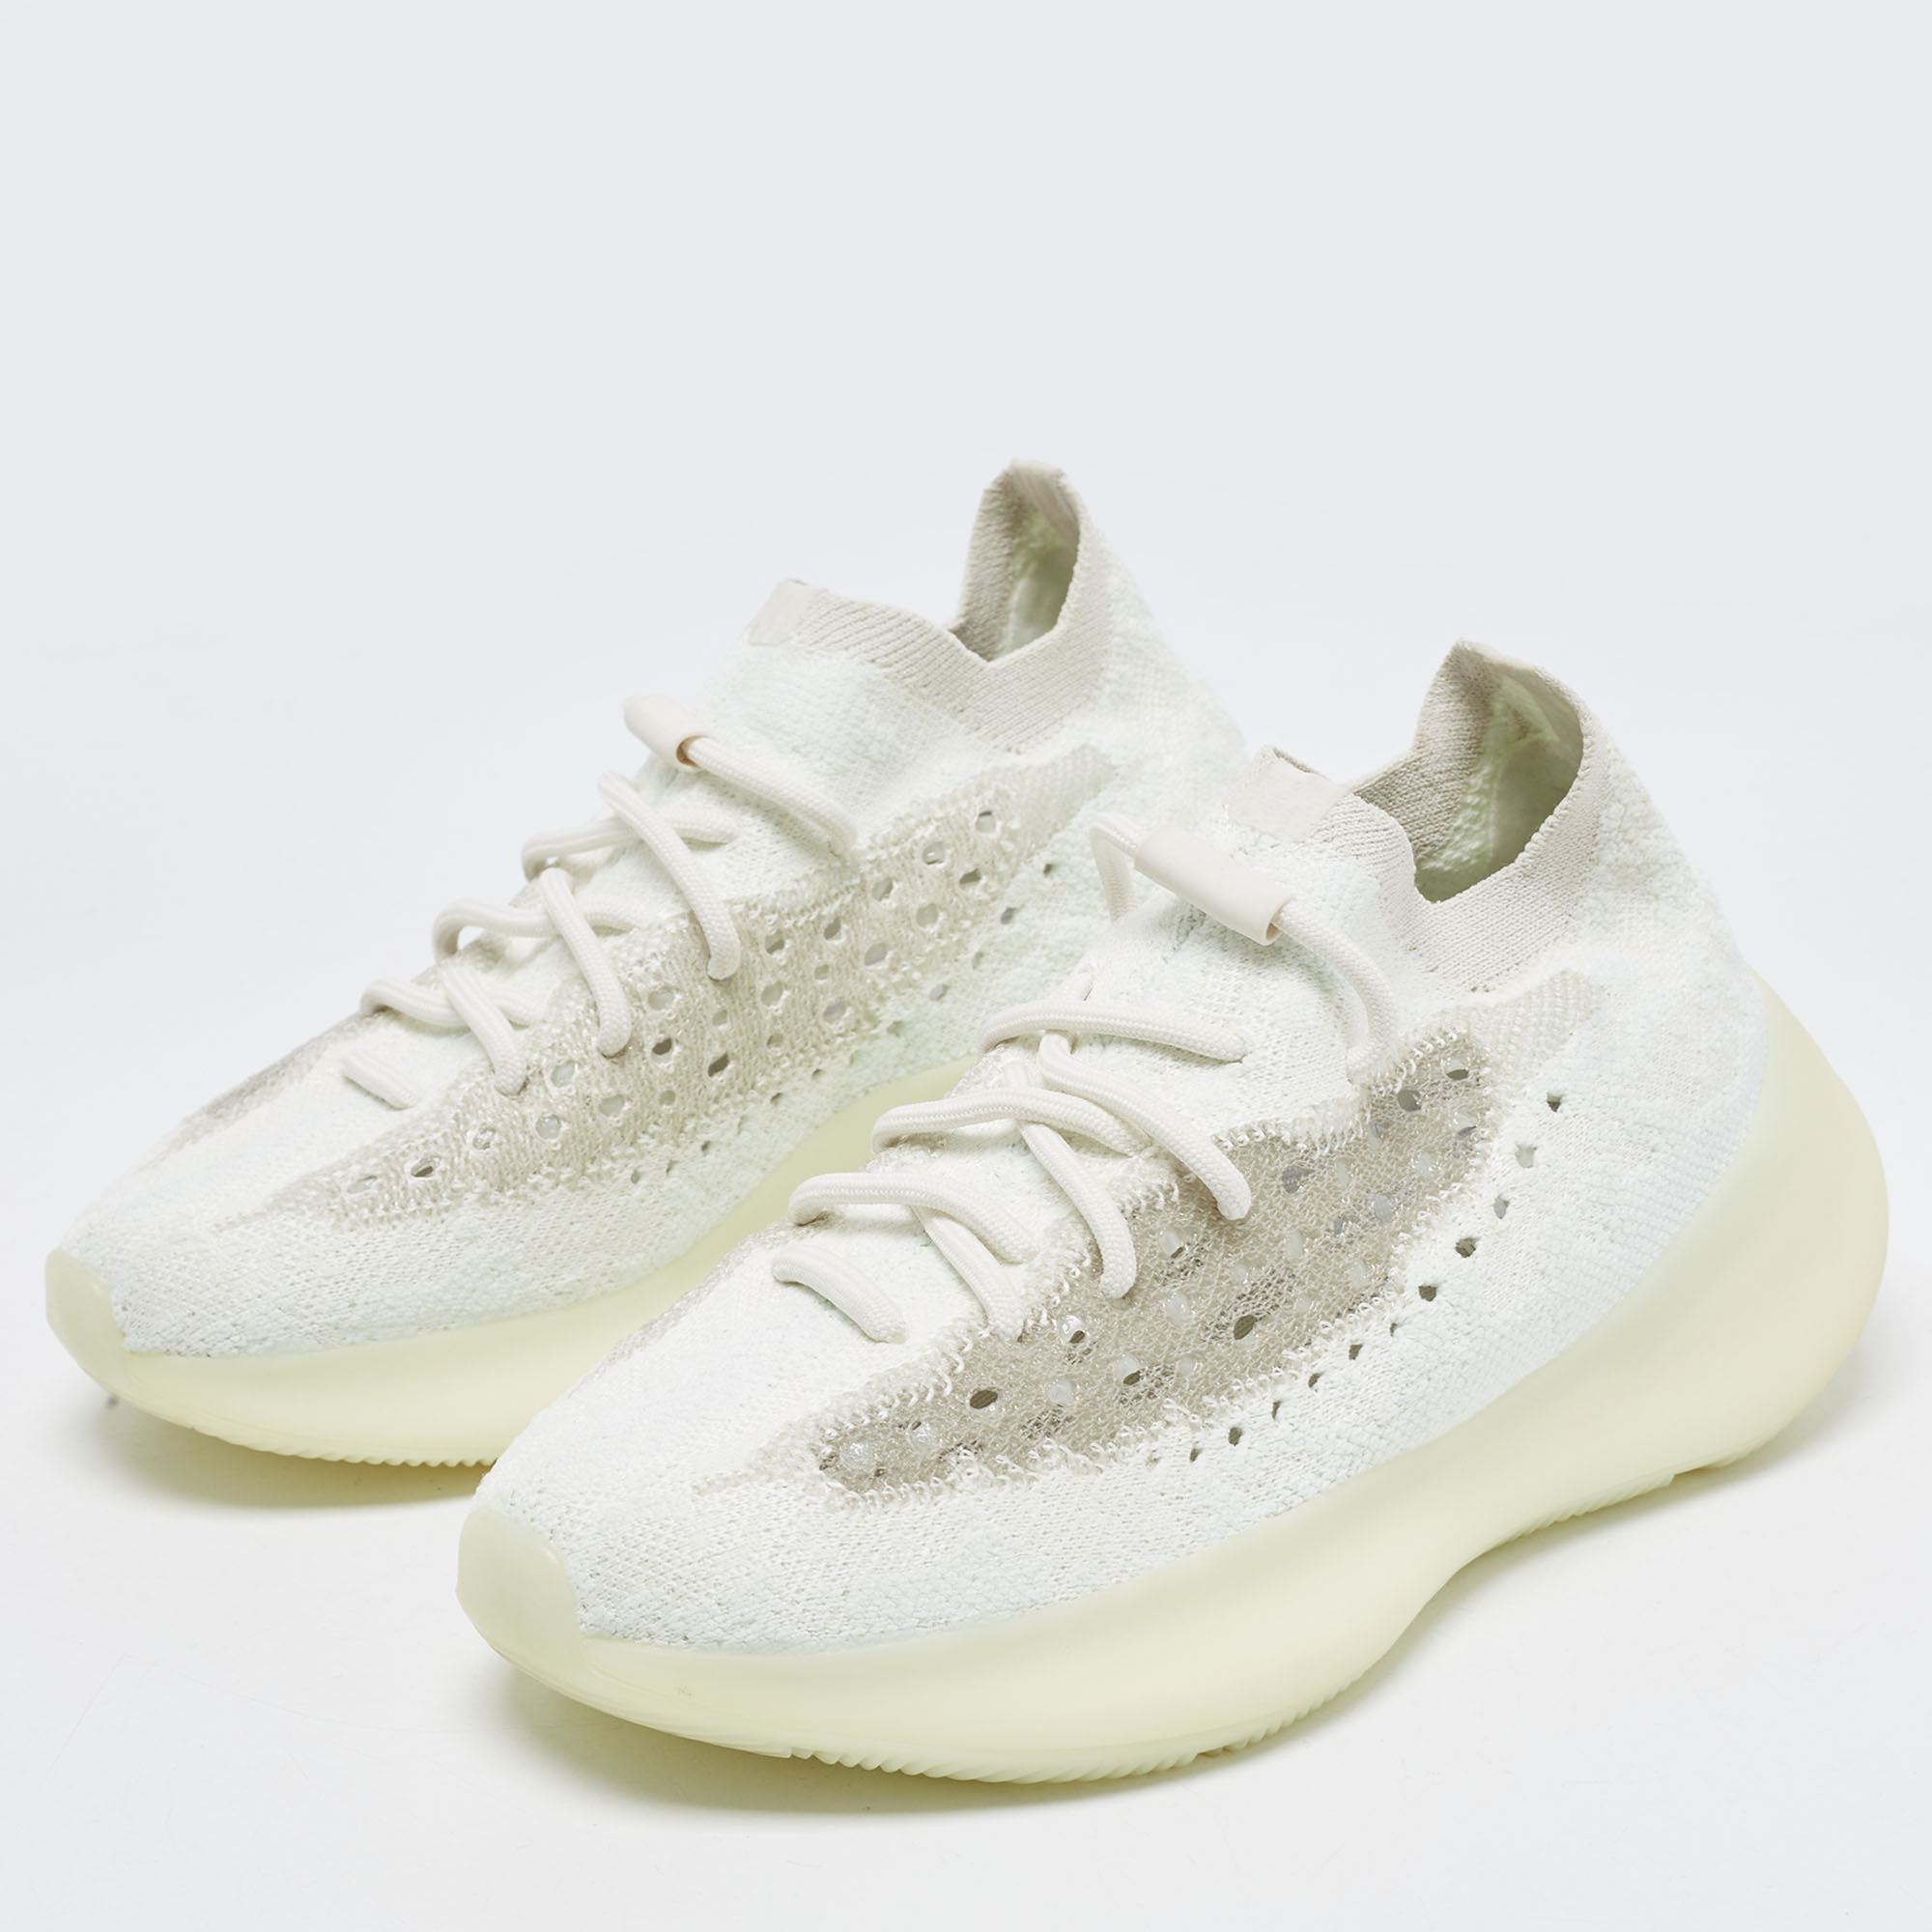 

Yeezy x Adidas White Fabric Boost 380 calcite-glow Sneakers Size